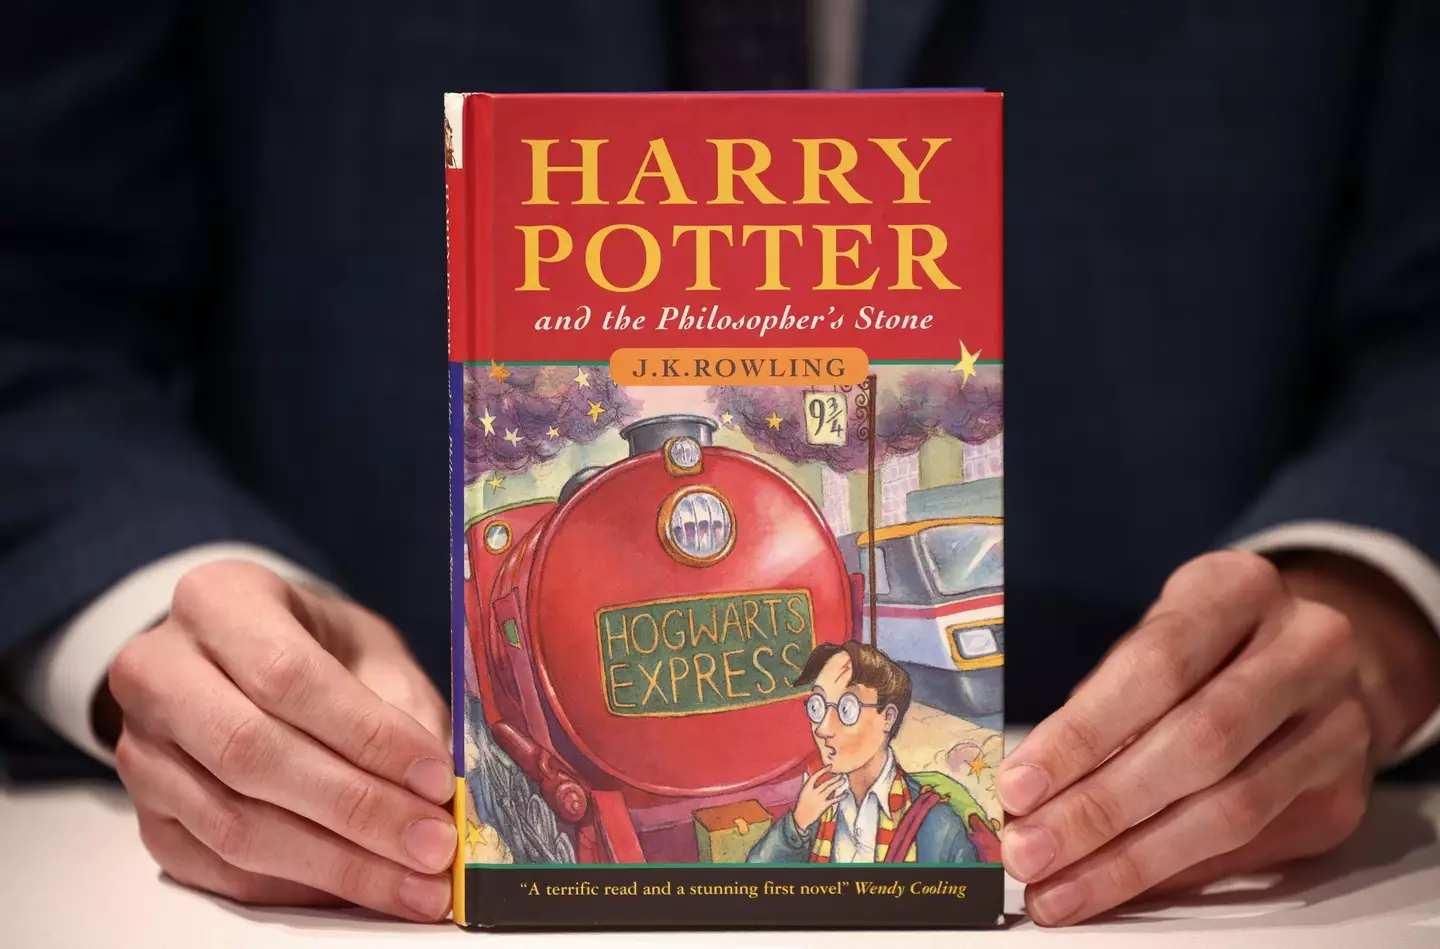 A rare first edition and signed copy of Harry Potter and the Philosopher's Stone is set to sell at auction for over £200,000.